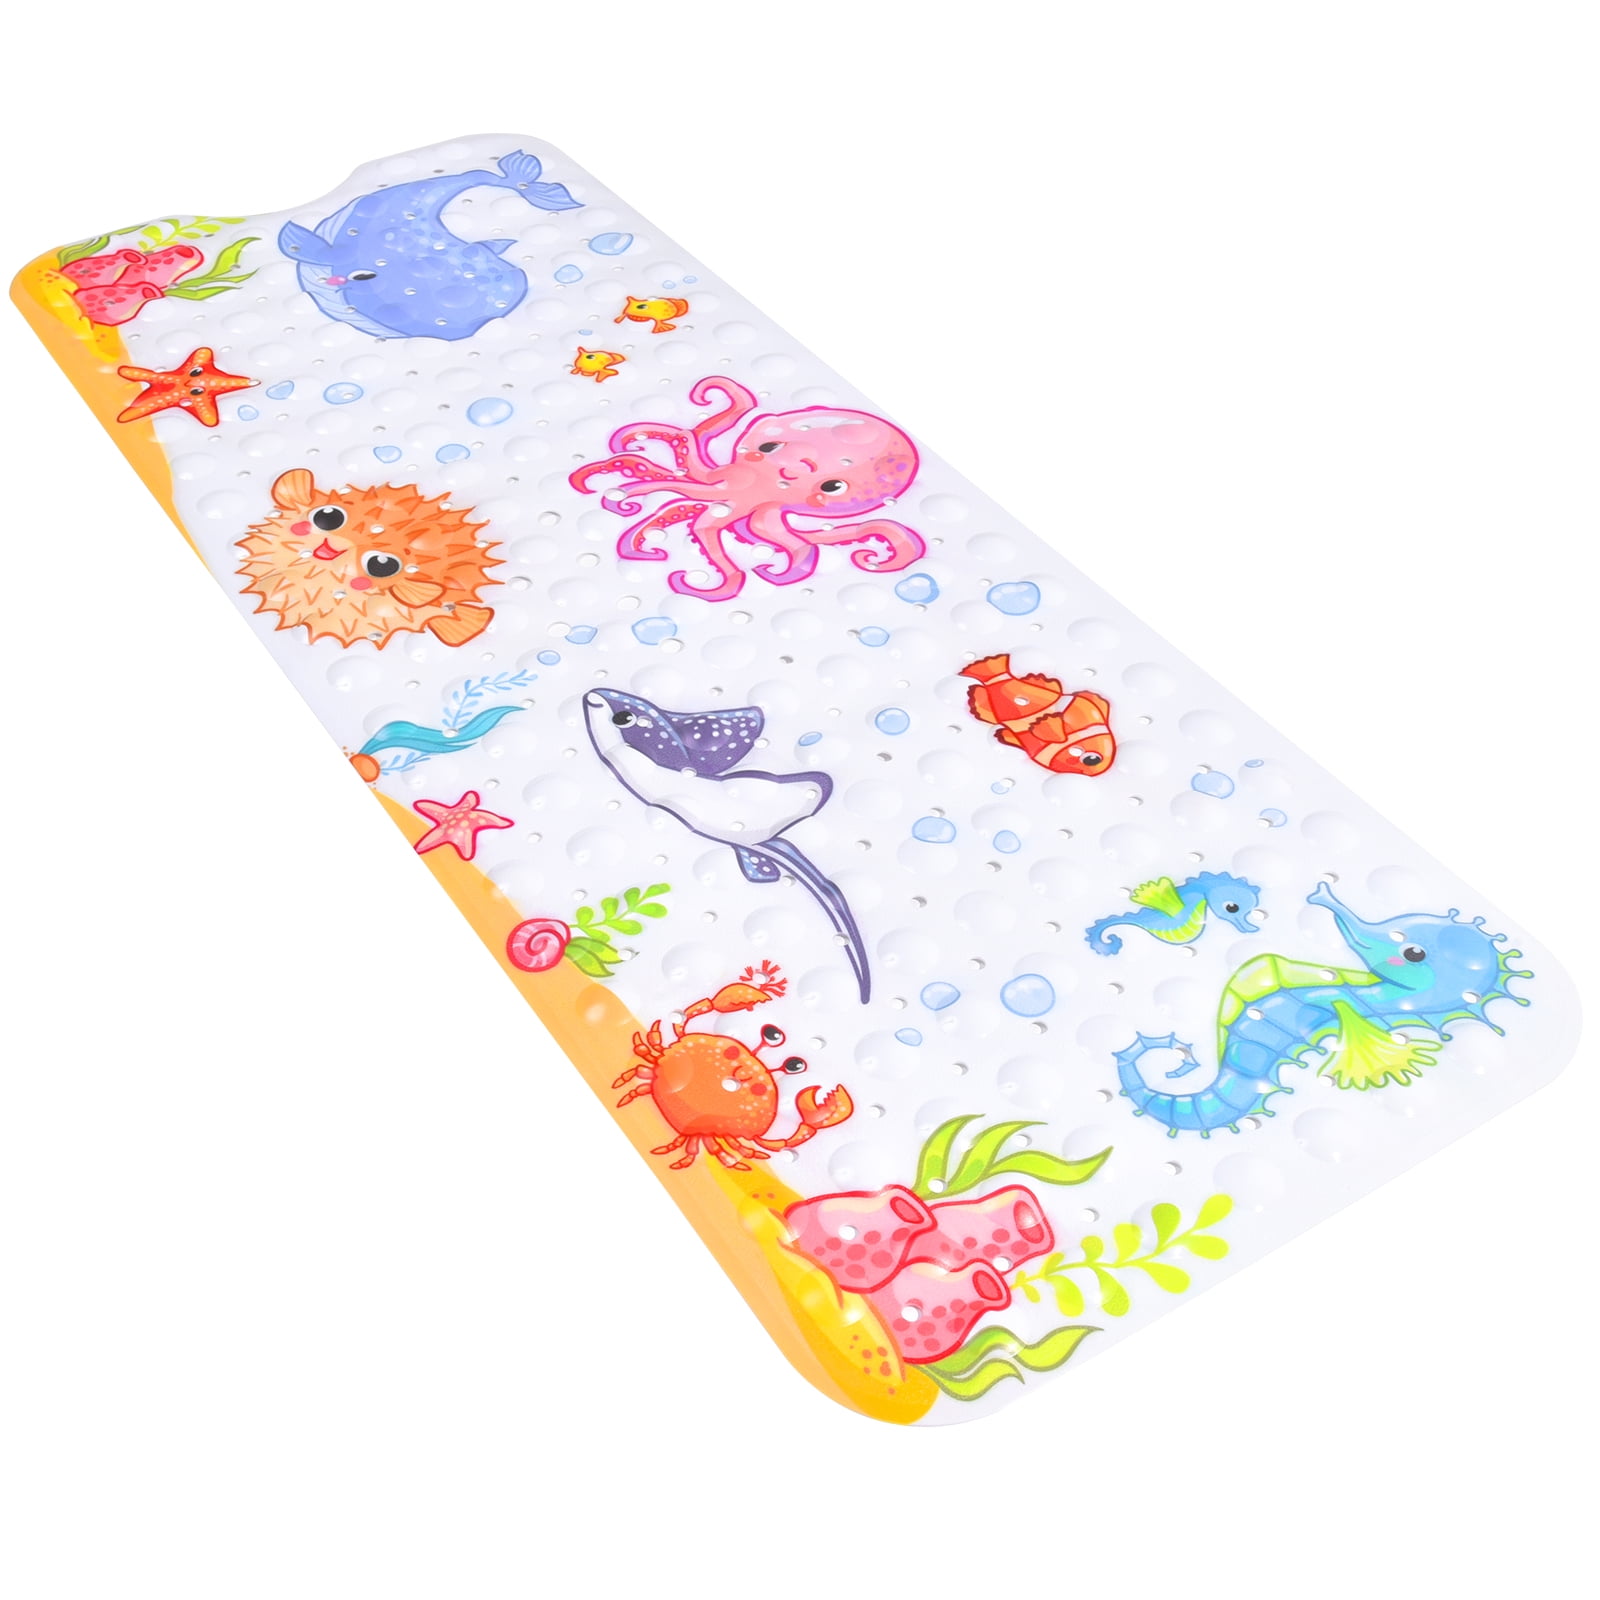 Blooming Bath Tub Mat Baby Infant Flower Bathing Sink-Cushion Security  Padded, Facebook Marketplace